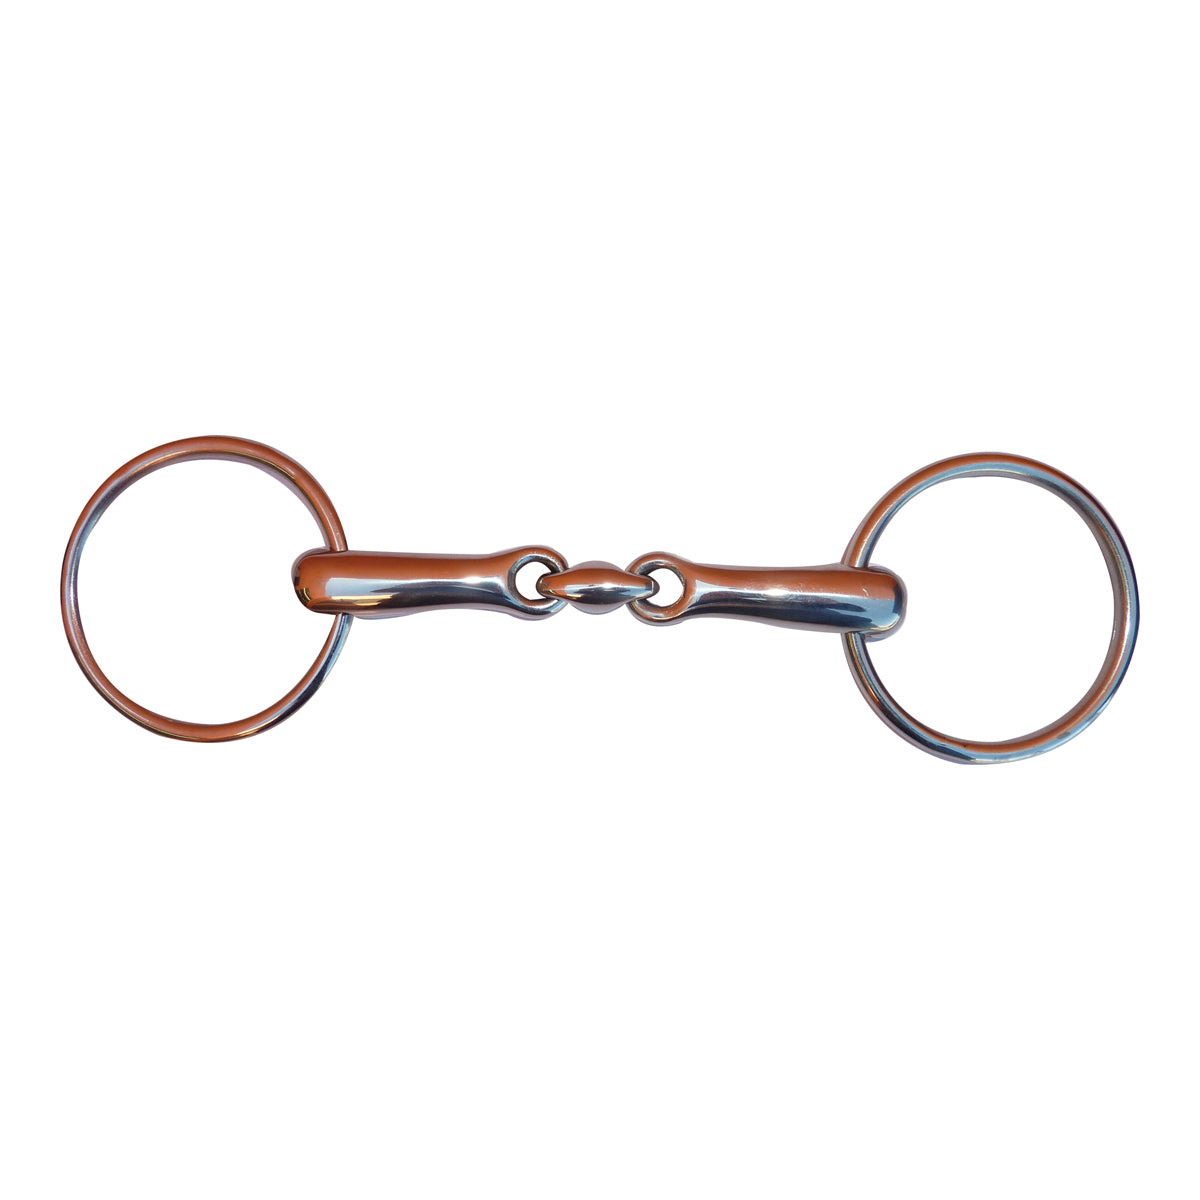 Showcraft - Gold link ring snaffle bit